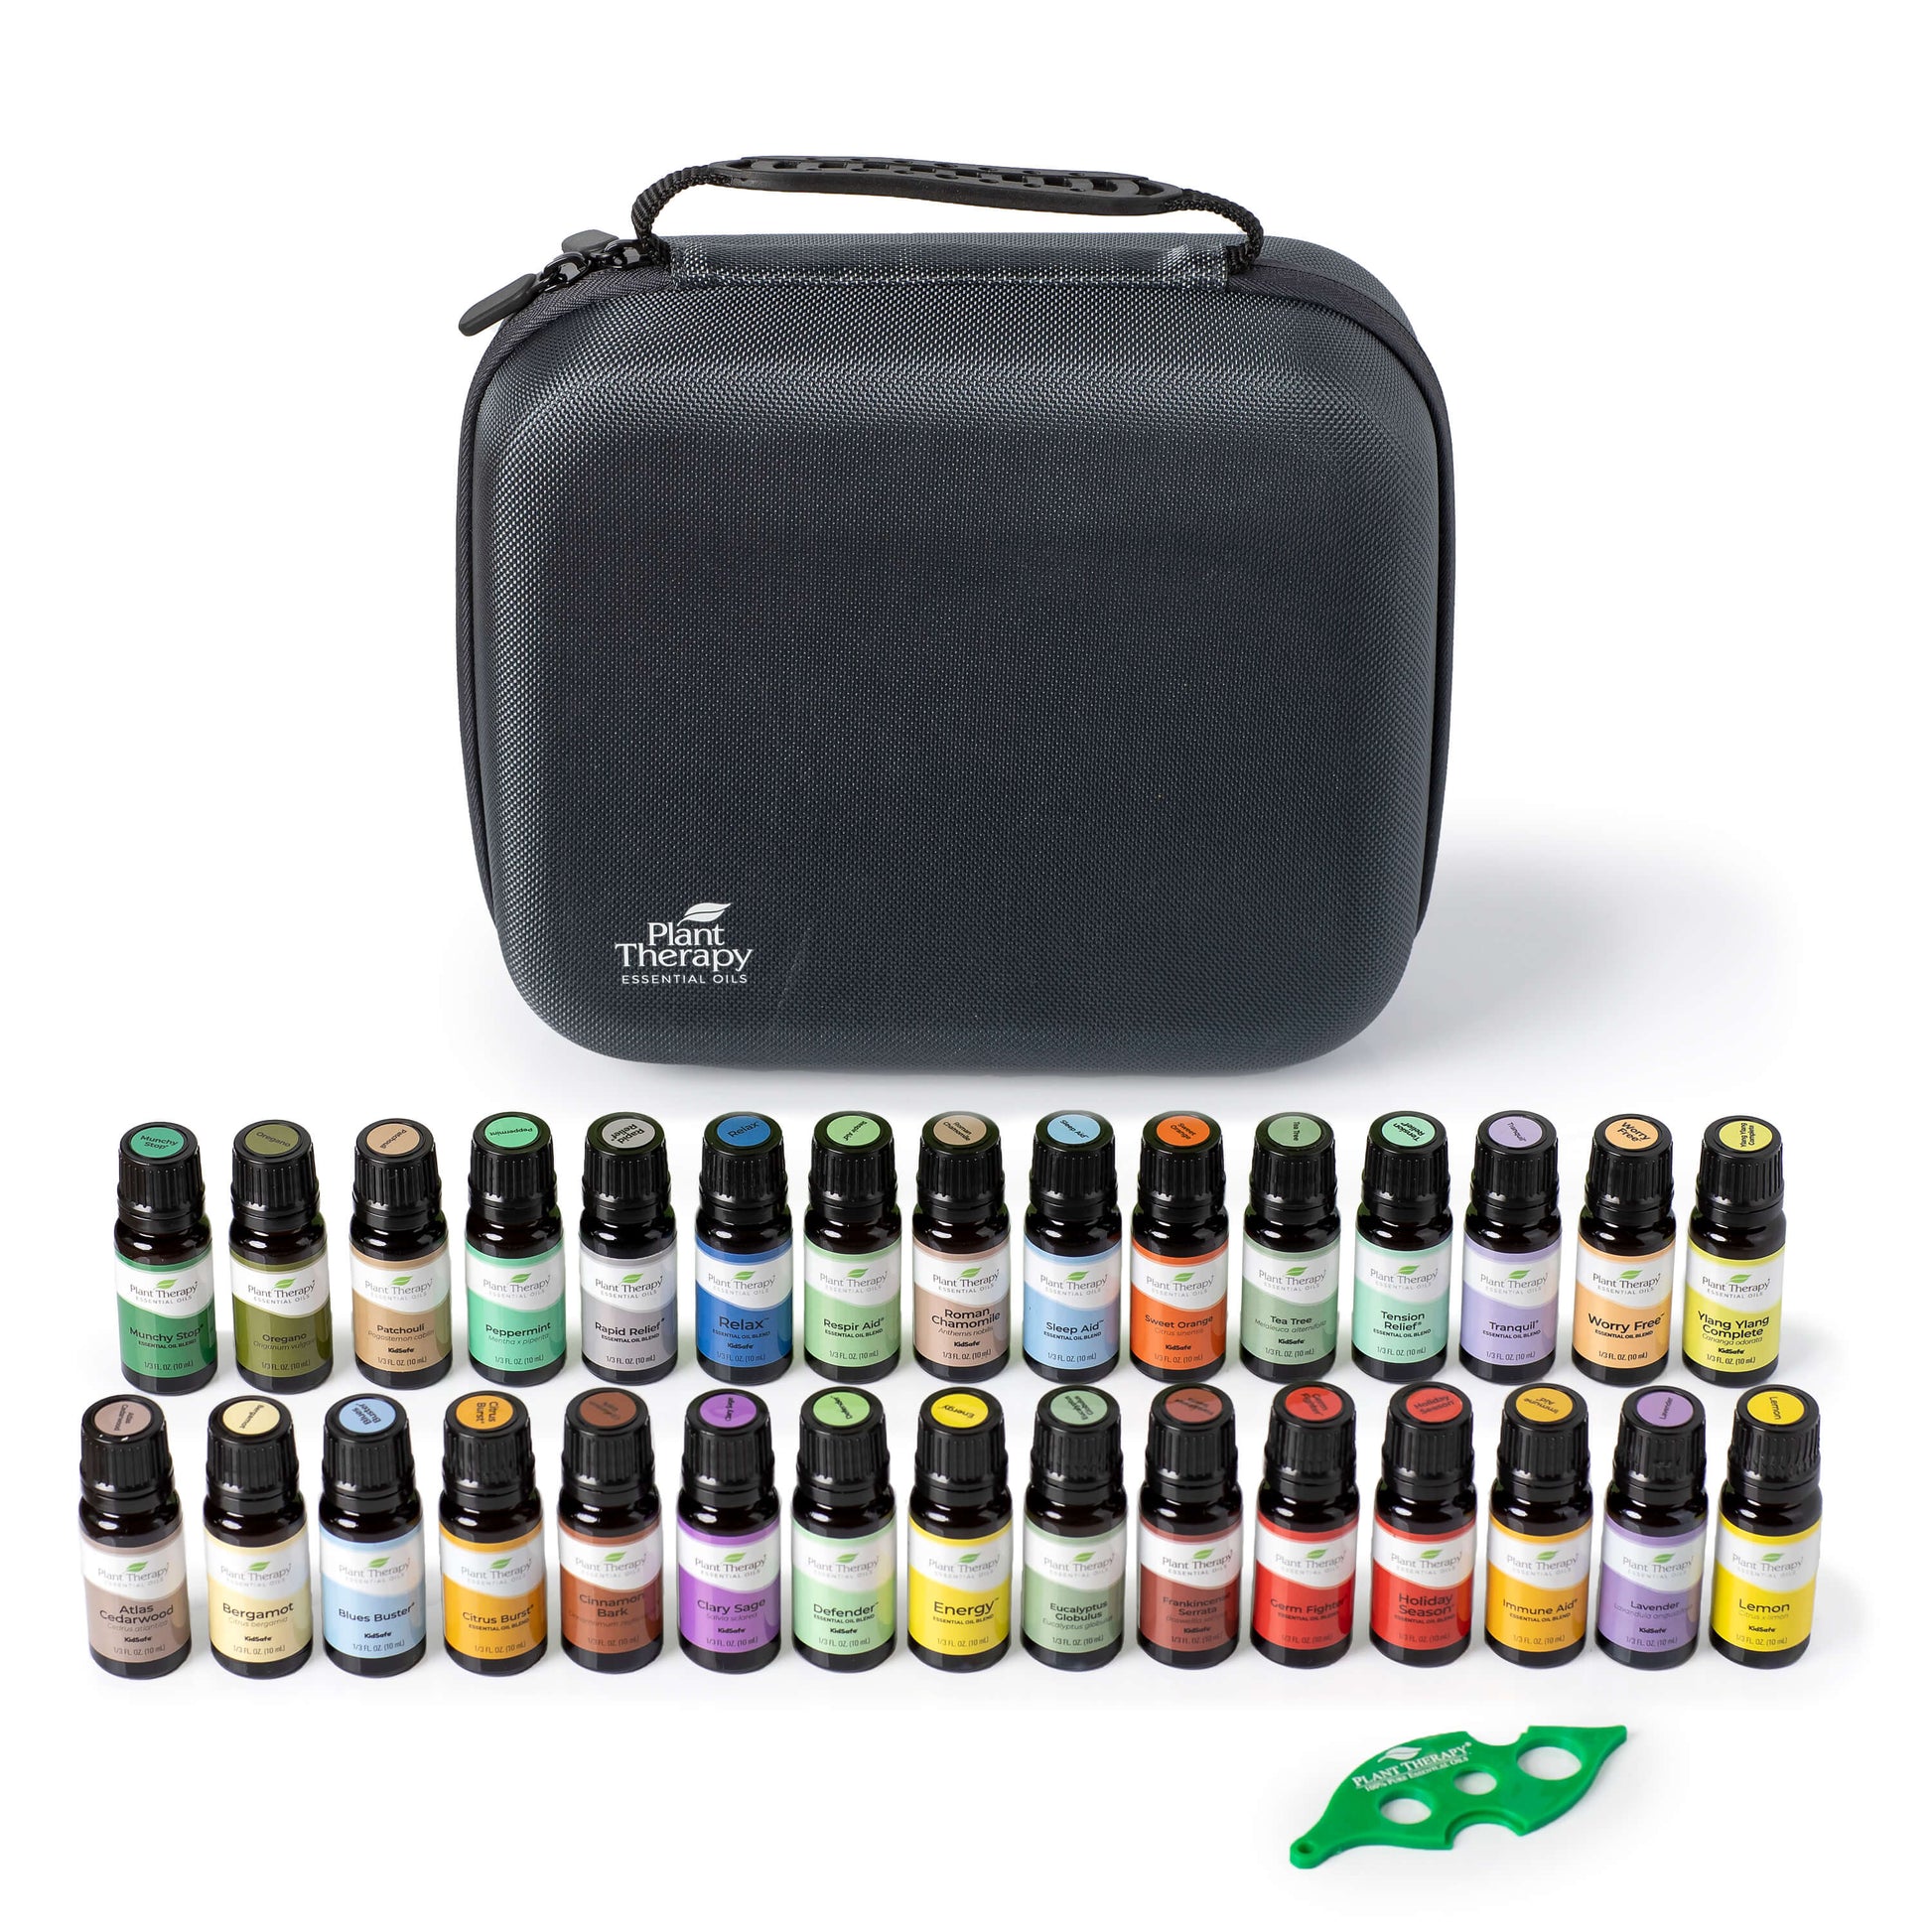 15 & 15 Essential Oil Set with Carrying Case – Plant Therapy